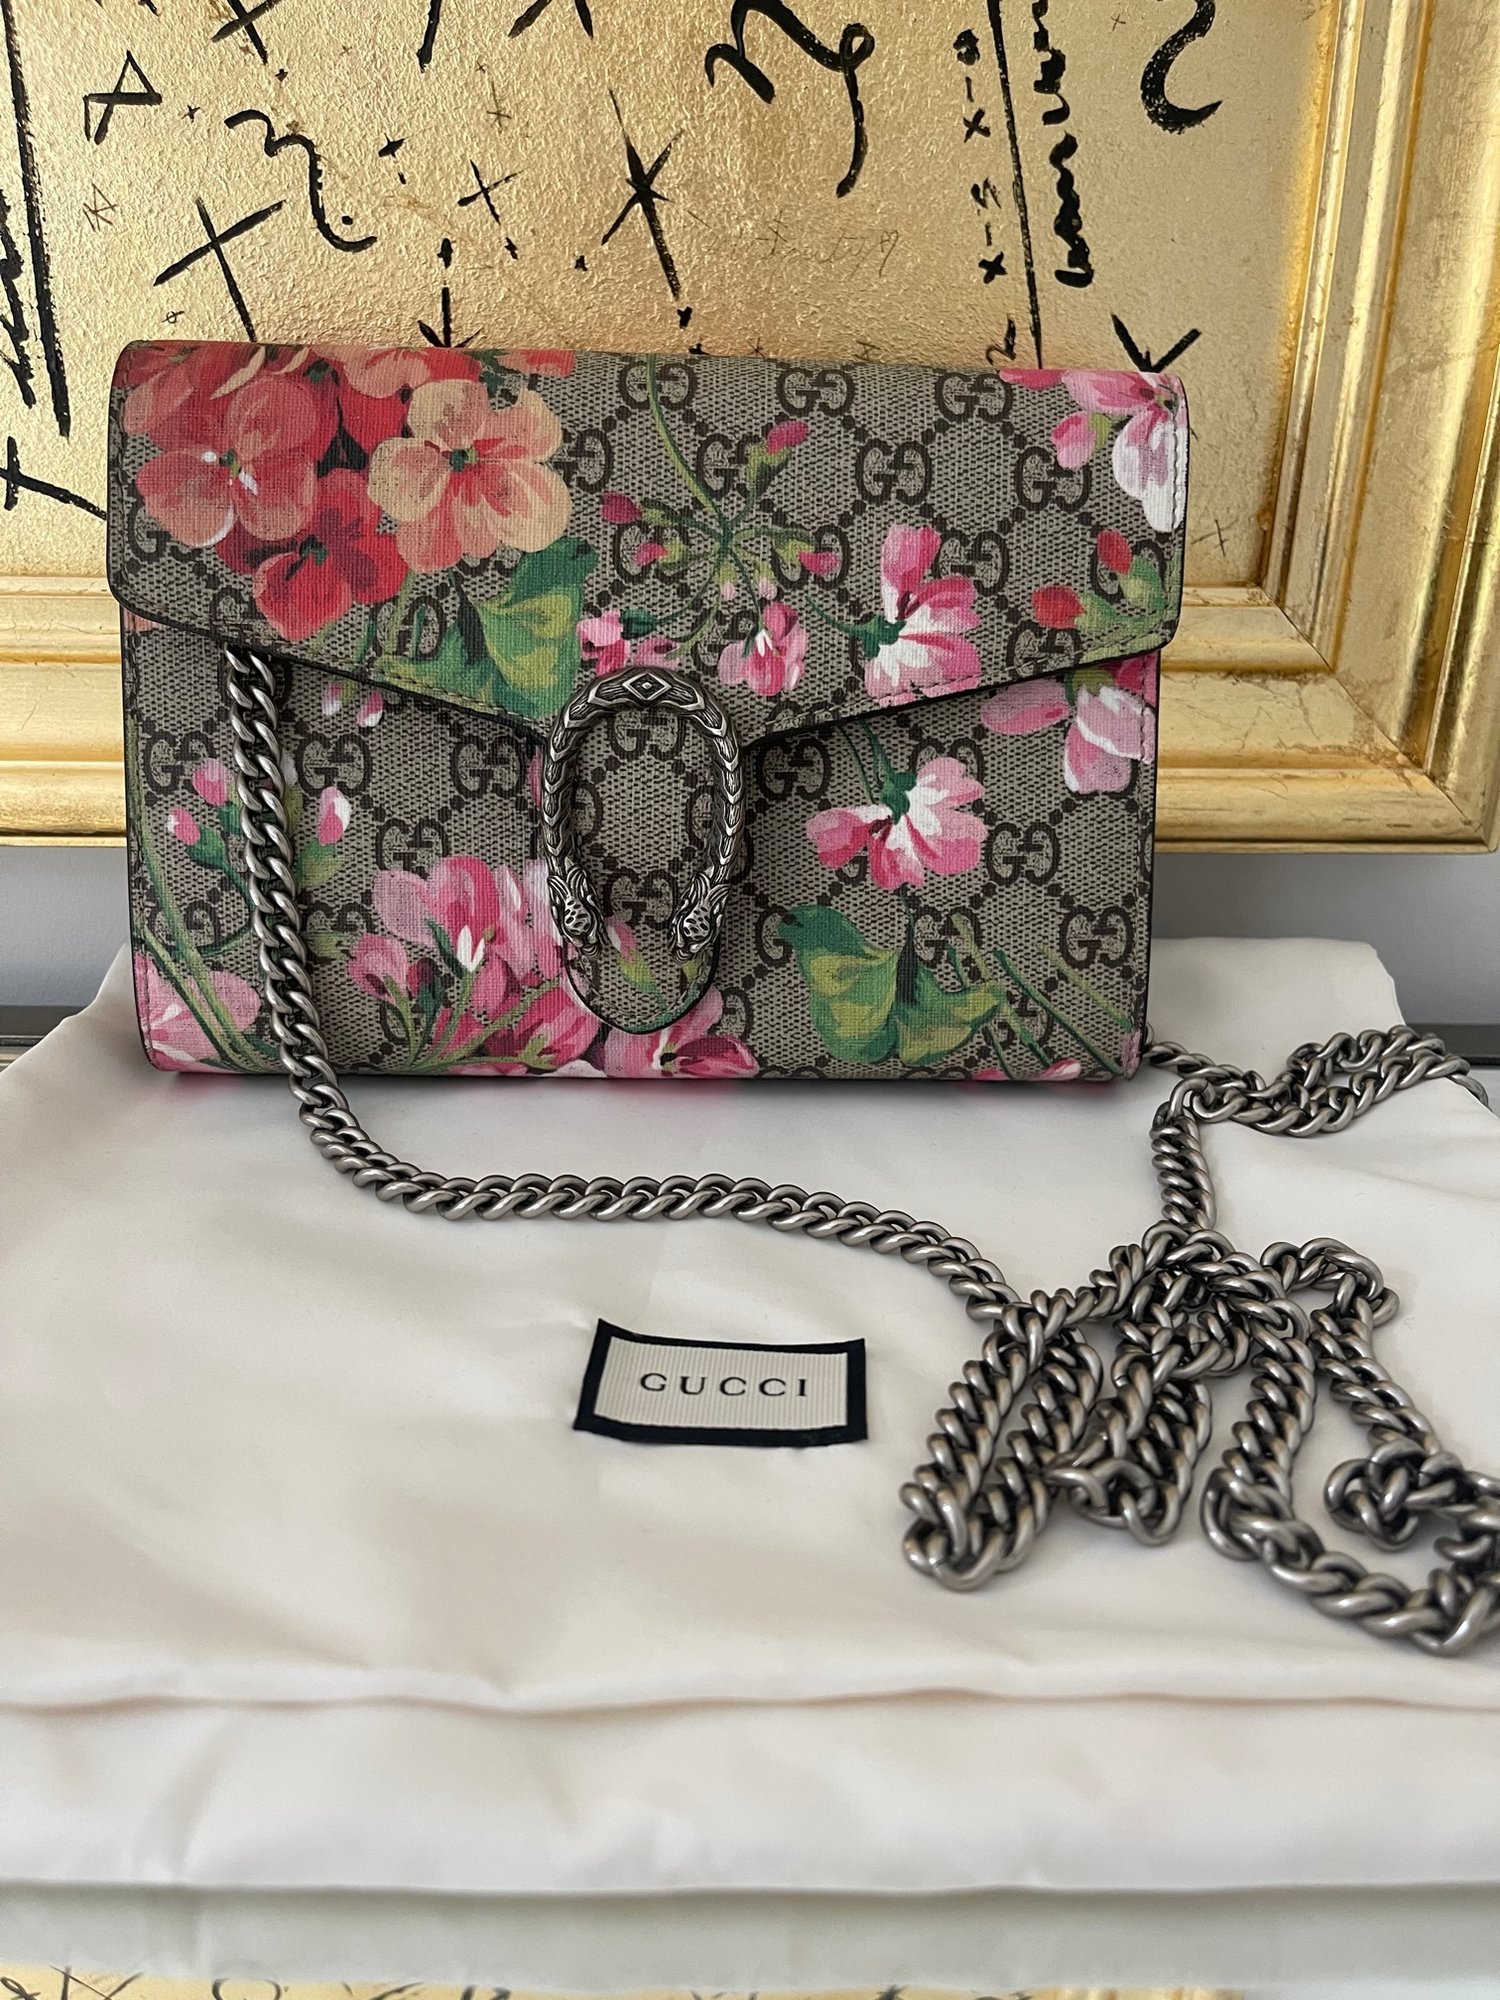 GUCCI Blue GG Blooms Coated Canvas Mini Dionysus Bag - The Purse